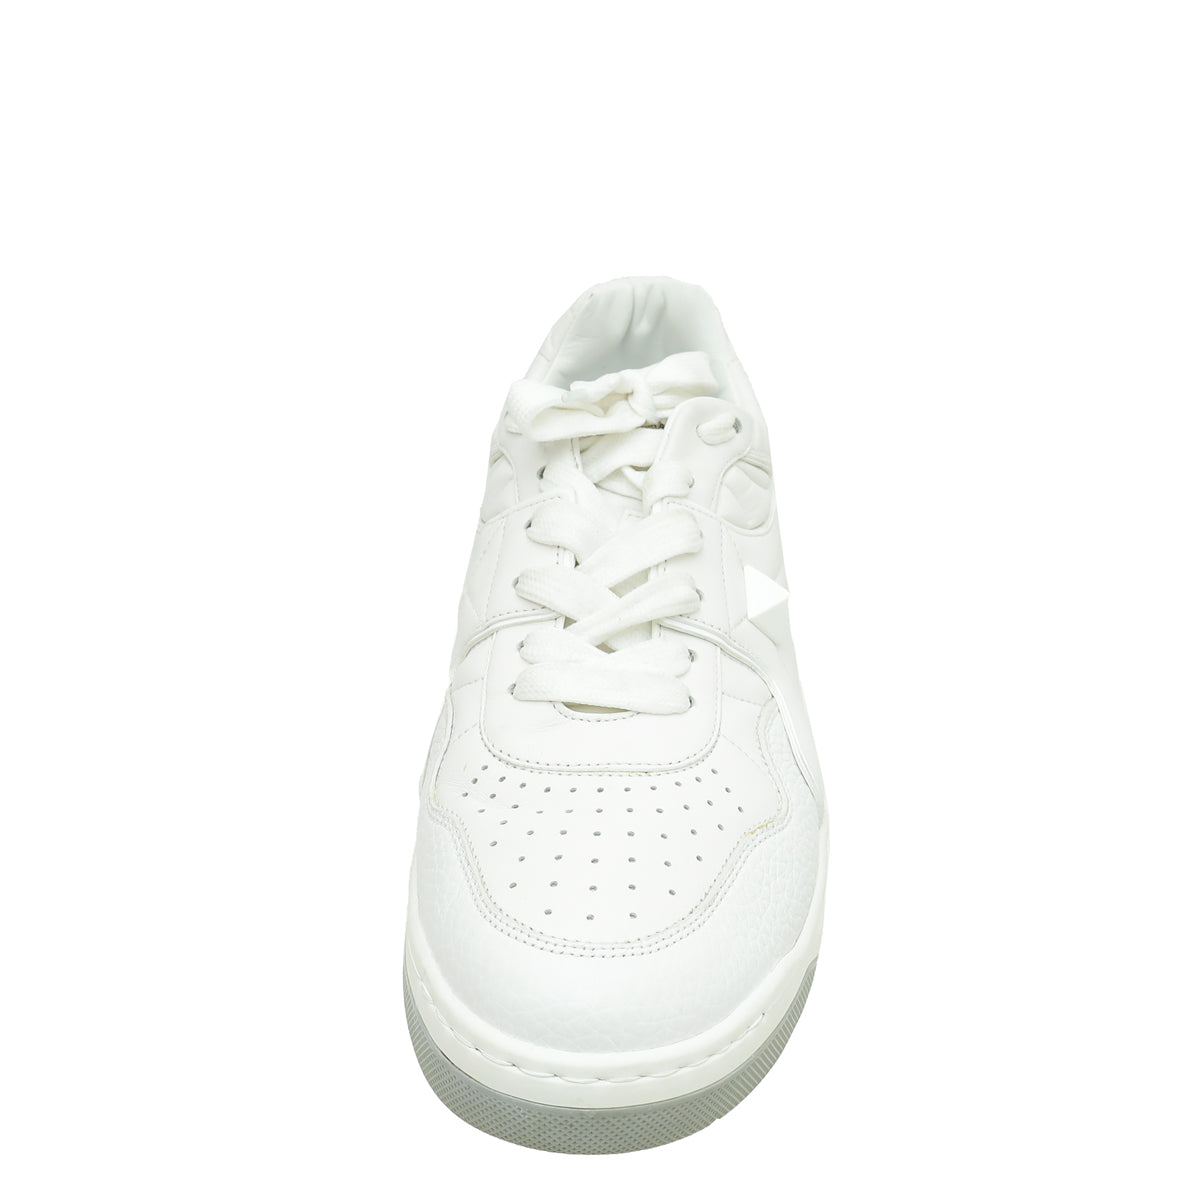 Valentino White One Stud Low Top Sneakers 44